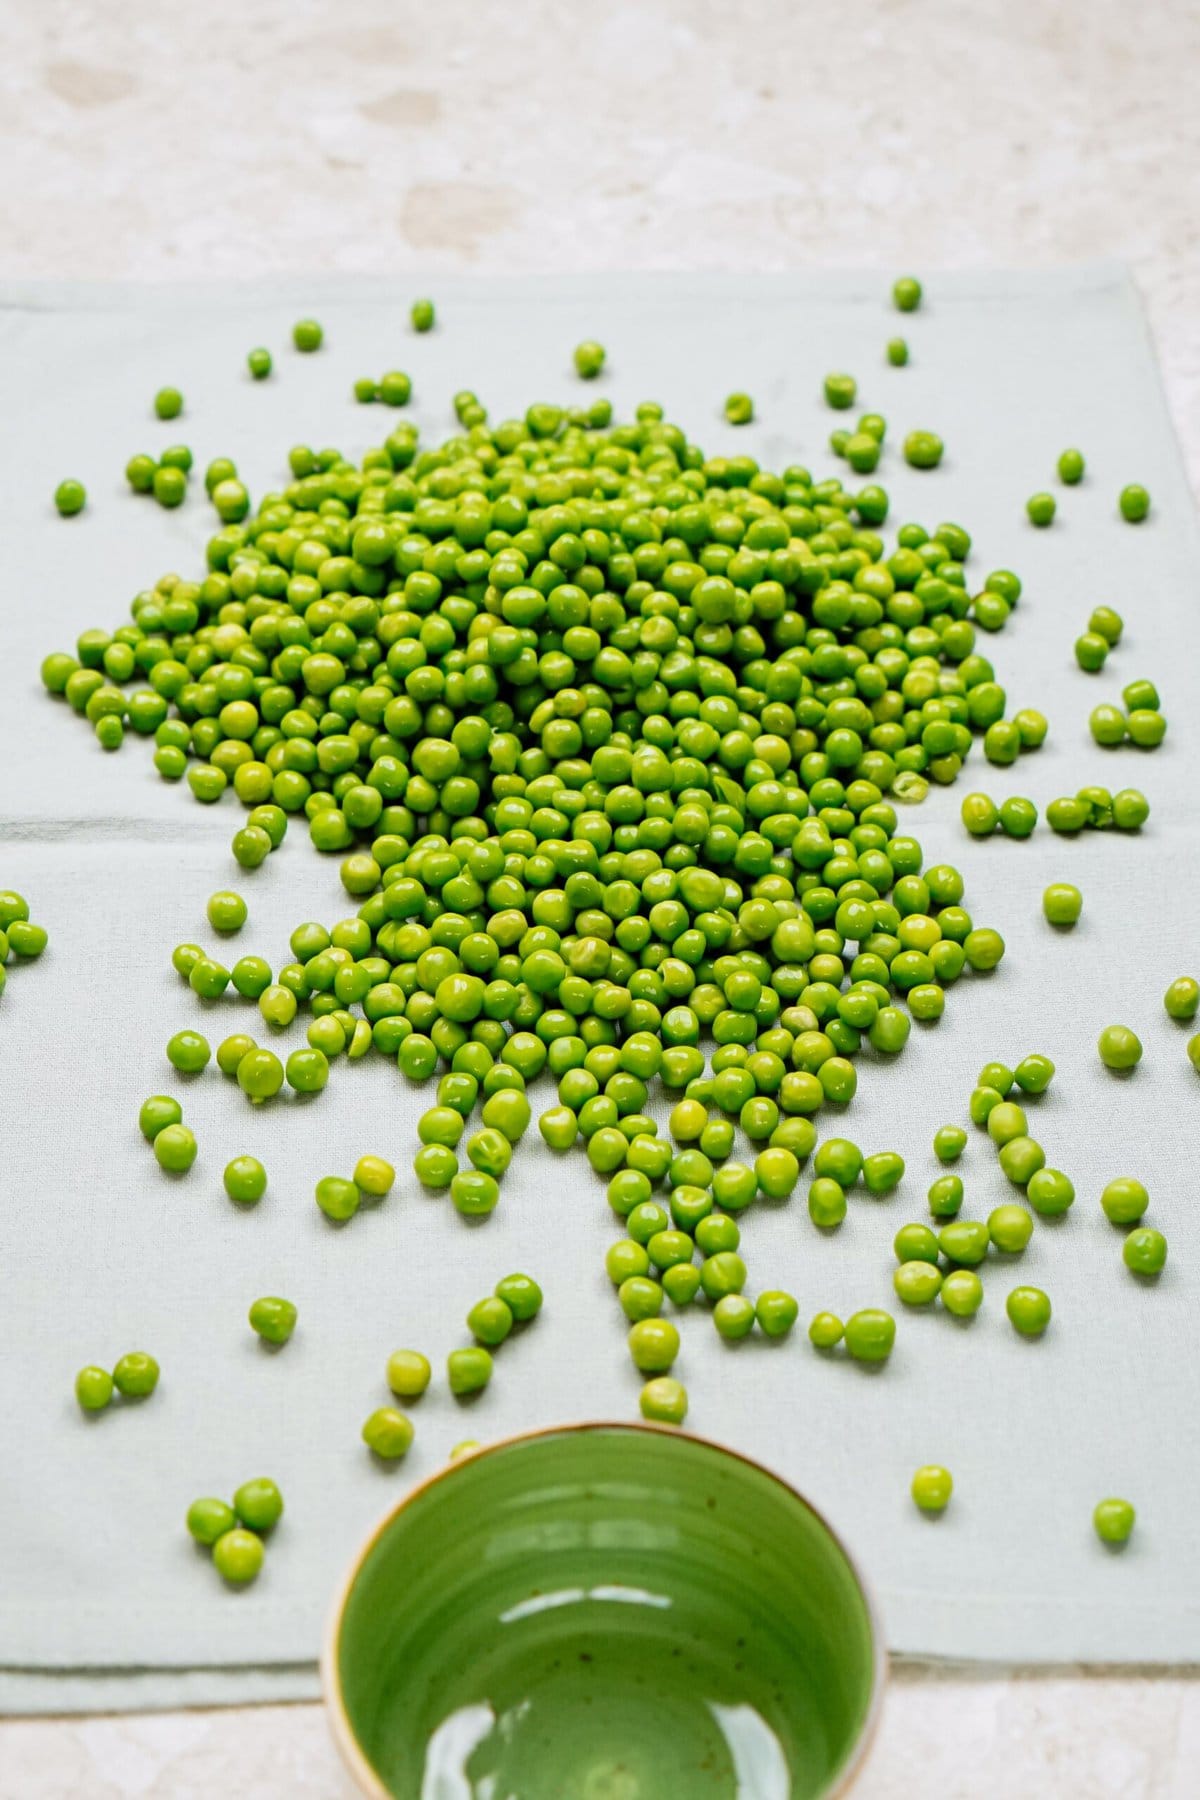 A pile of fresh green peas intended for a pea salad scattered on a light-colored surface with an overturned green bowl to the side.